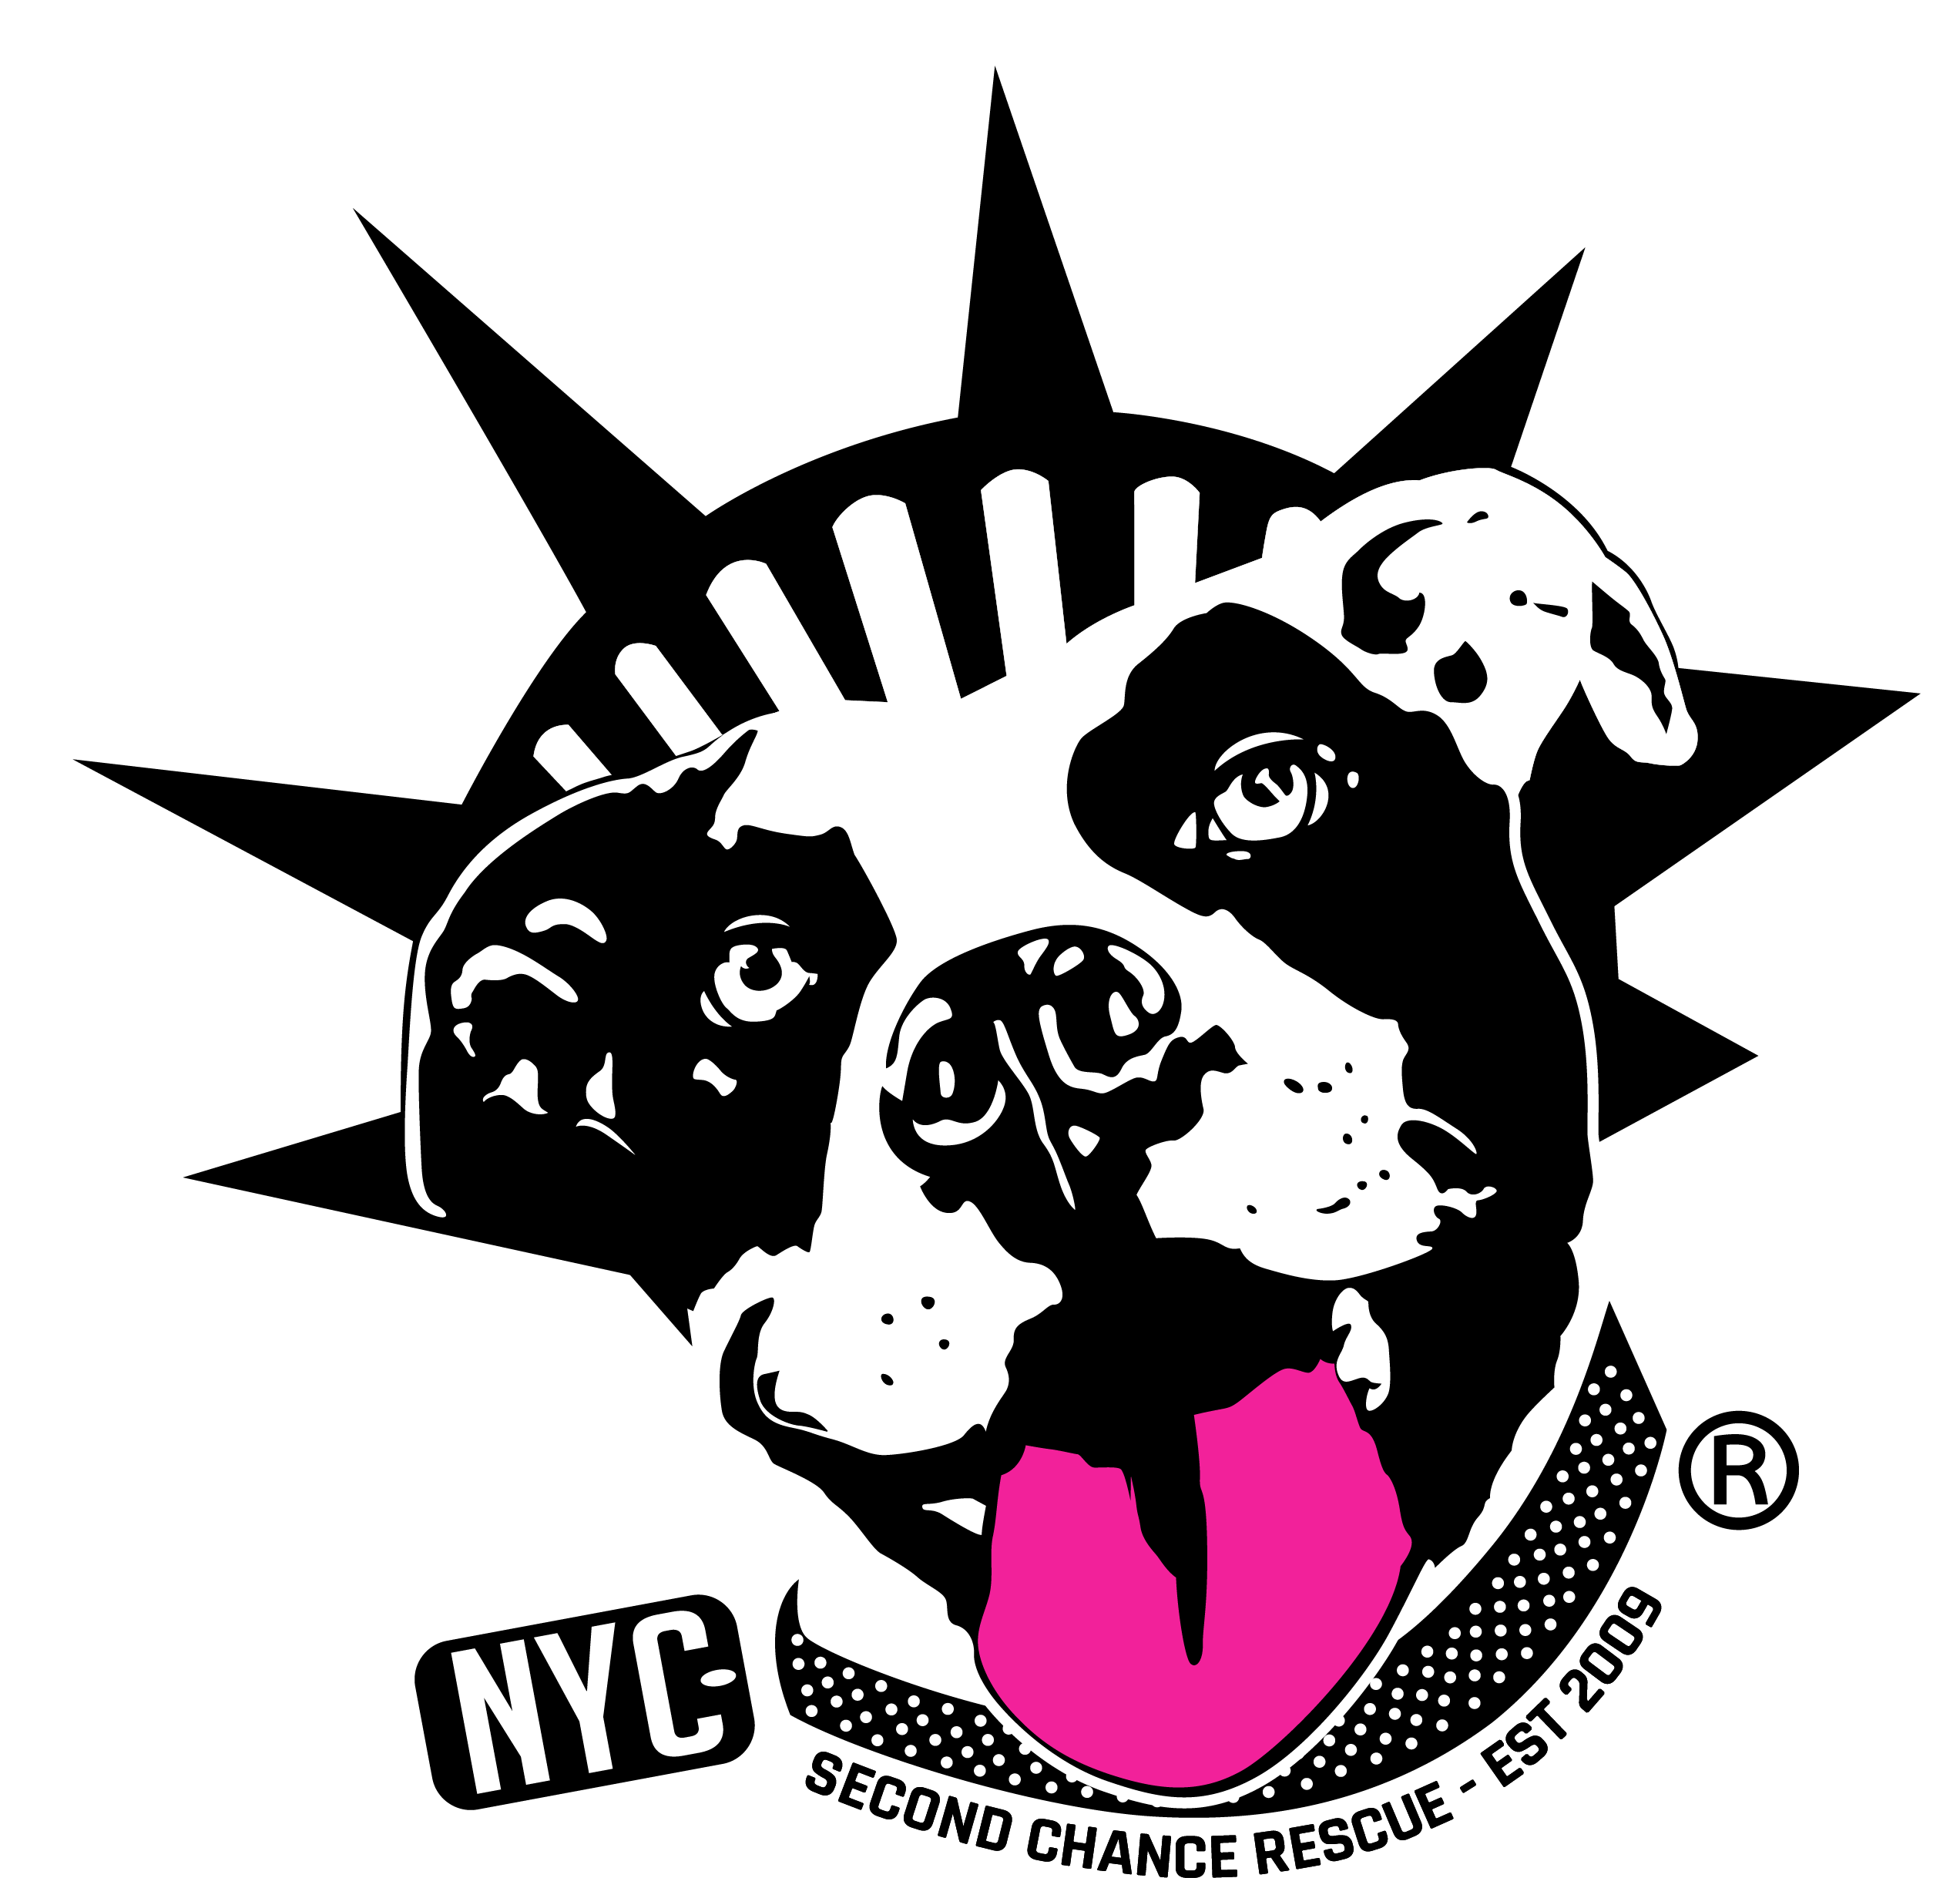 NYC Second Chance Rescue